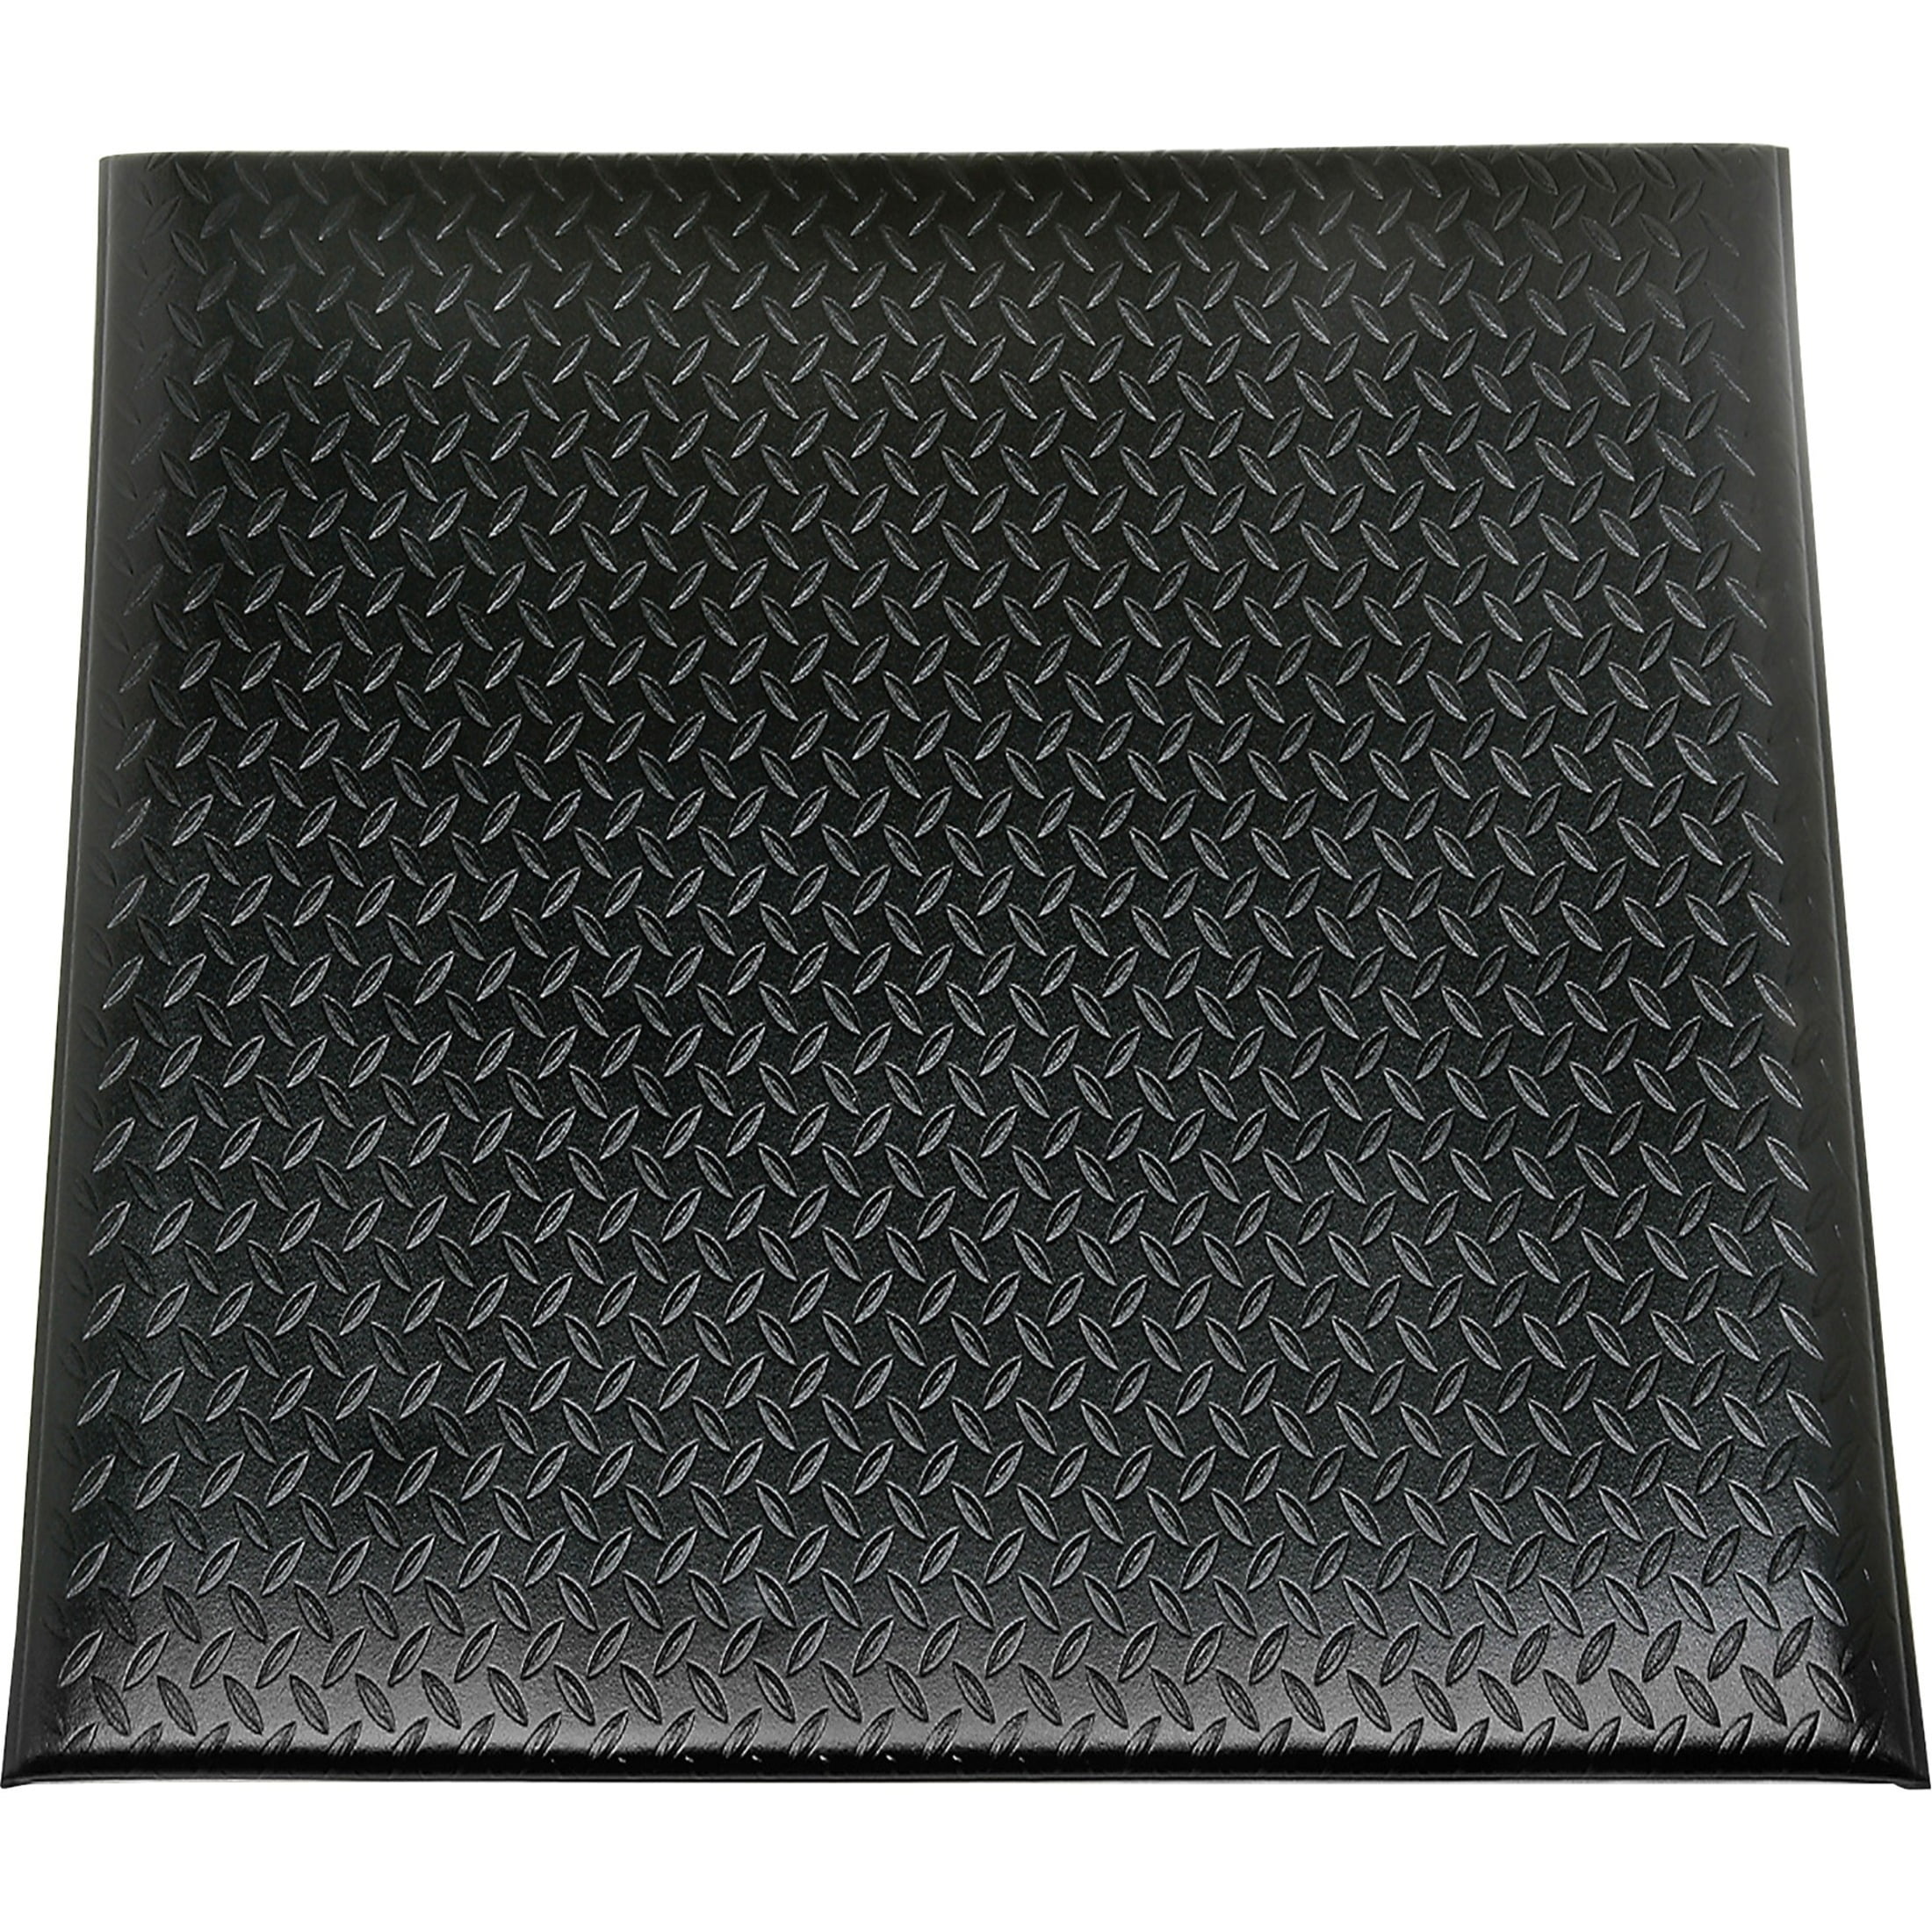 SKY MATS Anti-Fatigue Floor Mat - Commercial Grade Comfort Foam - Relieves  Foot, Knee, and Back Pain (Midnight Black, 20x32x3/4-Inch)